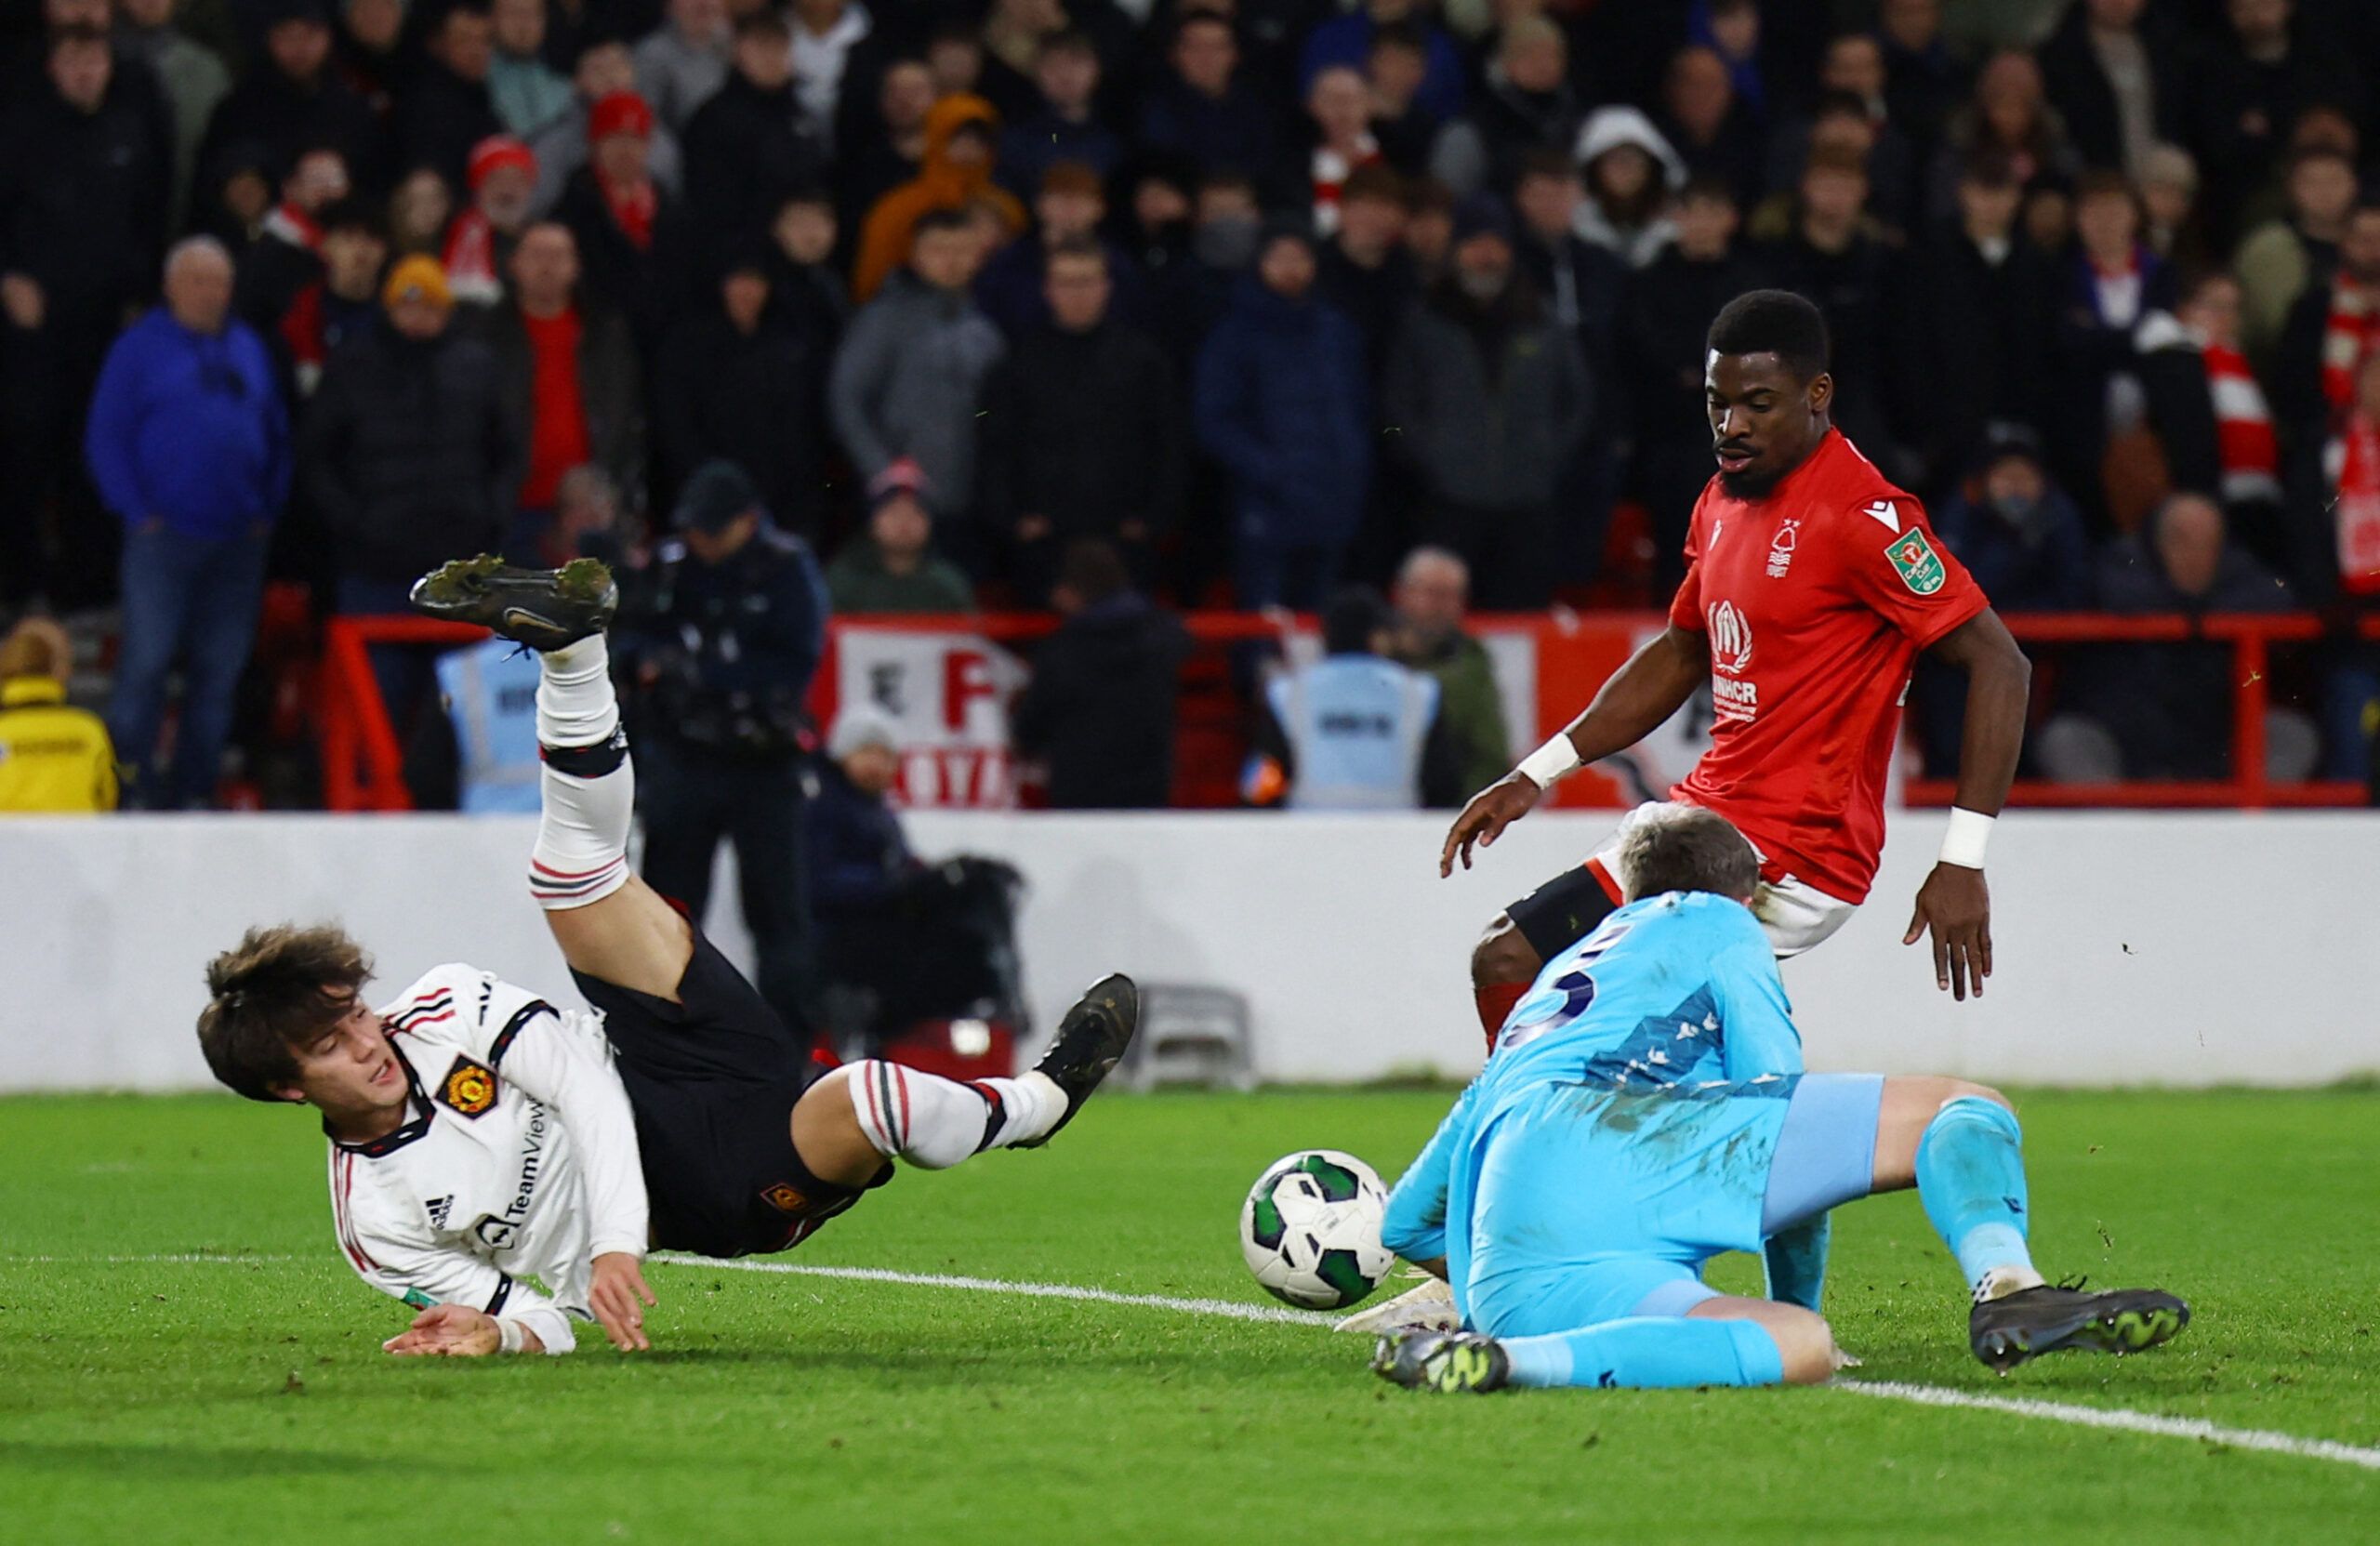 Soccer Football - Carabao Cup - Semi Final - First Leg - Nottingham Forest v Manchester United - The City Ground, Nottingham, Britain - January 25, 2023 Manchester United's Facundo Pellistri in action with Nottingham Forest's Wayne Hennessey and Serge Aurier REUTERS/Molly Darlington